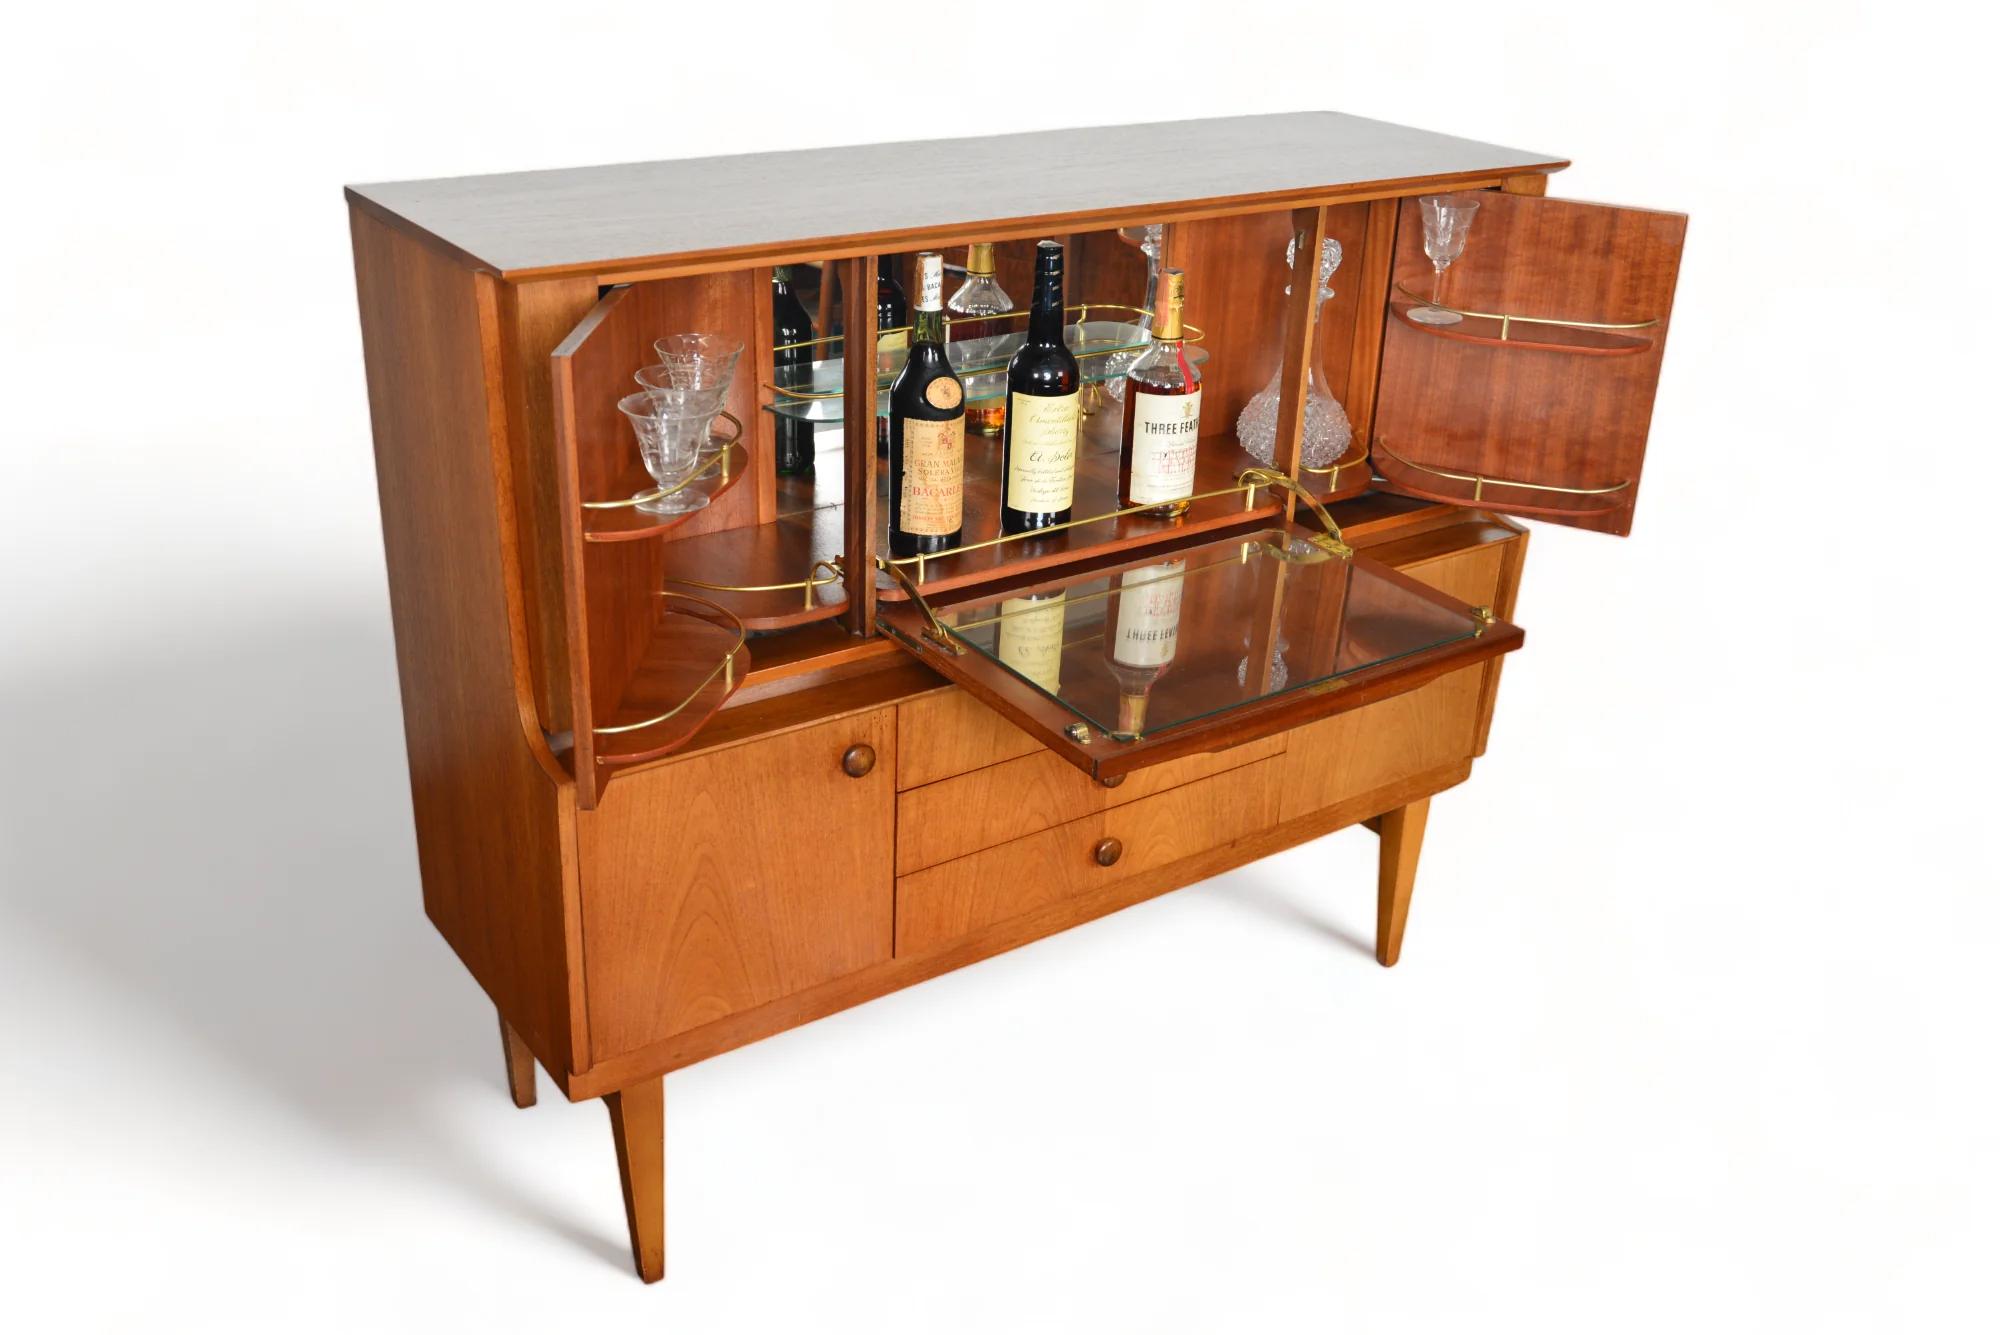 English Modern Cocktail Cabinet In Teak With Fold Out Bar 1